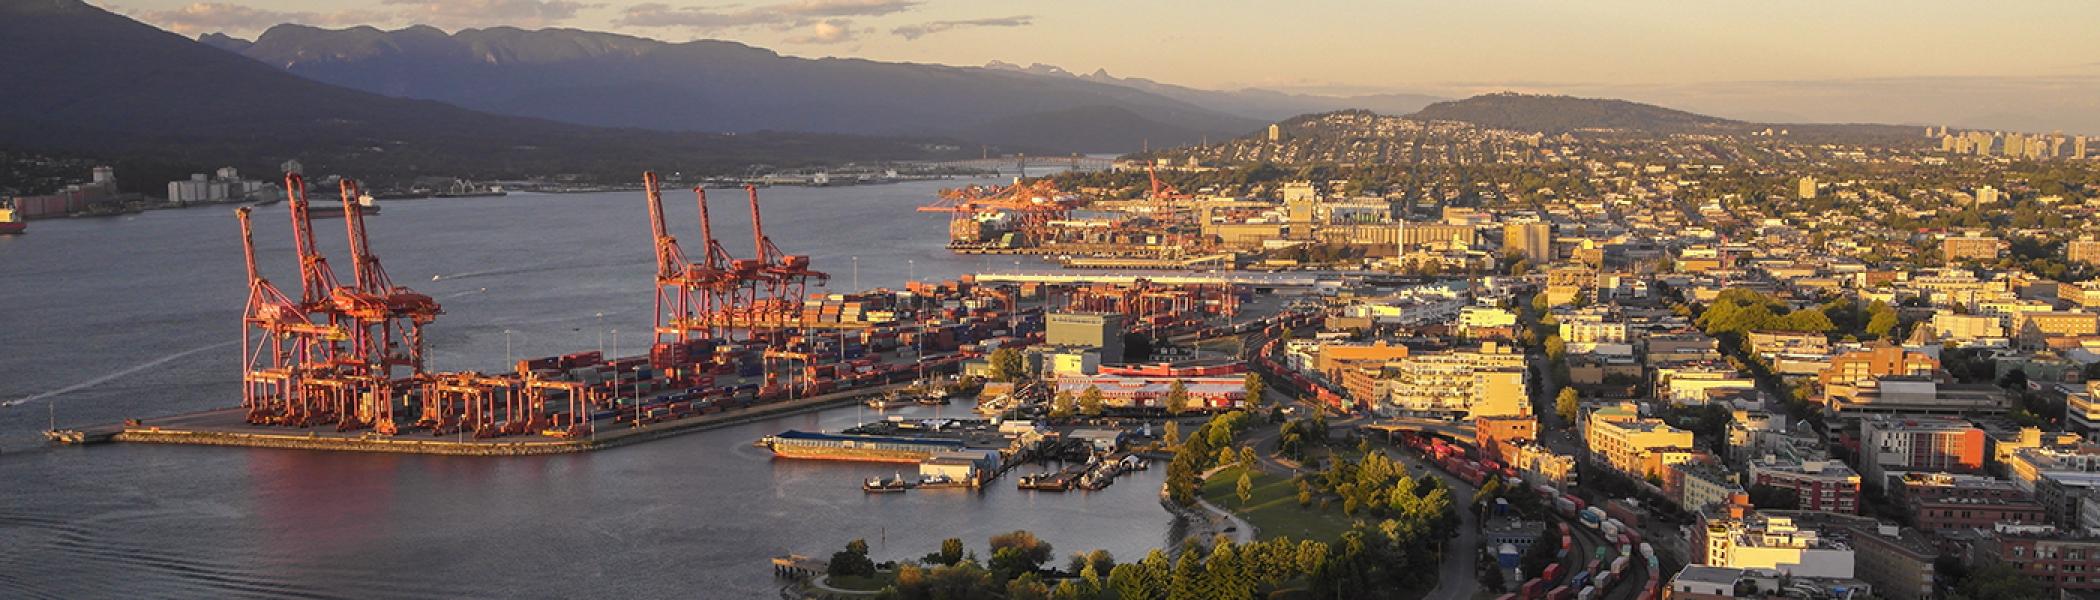 Aerial view of Vancouver harbour in the late afternoon sun